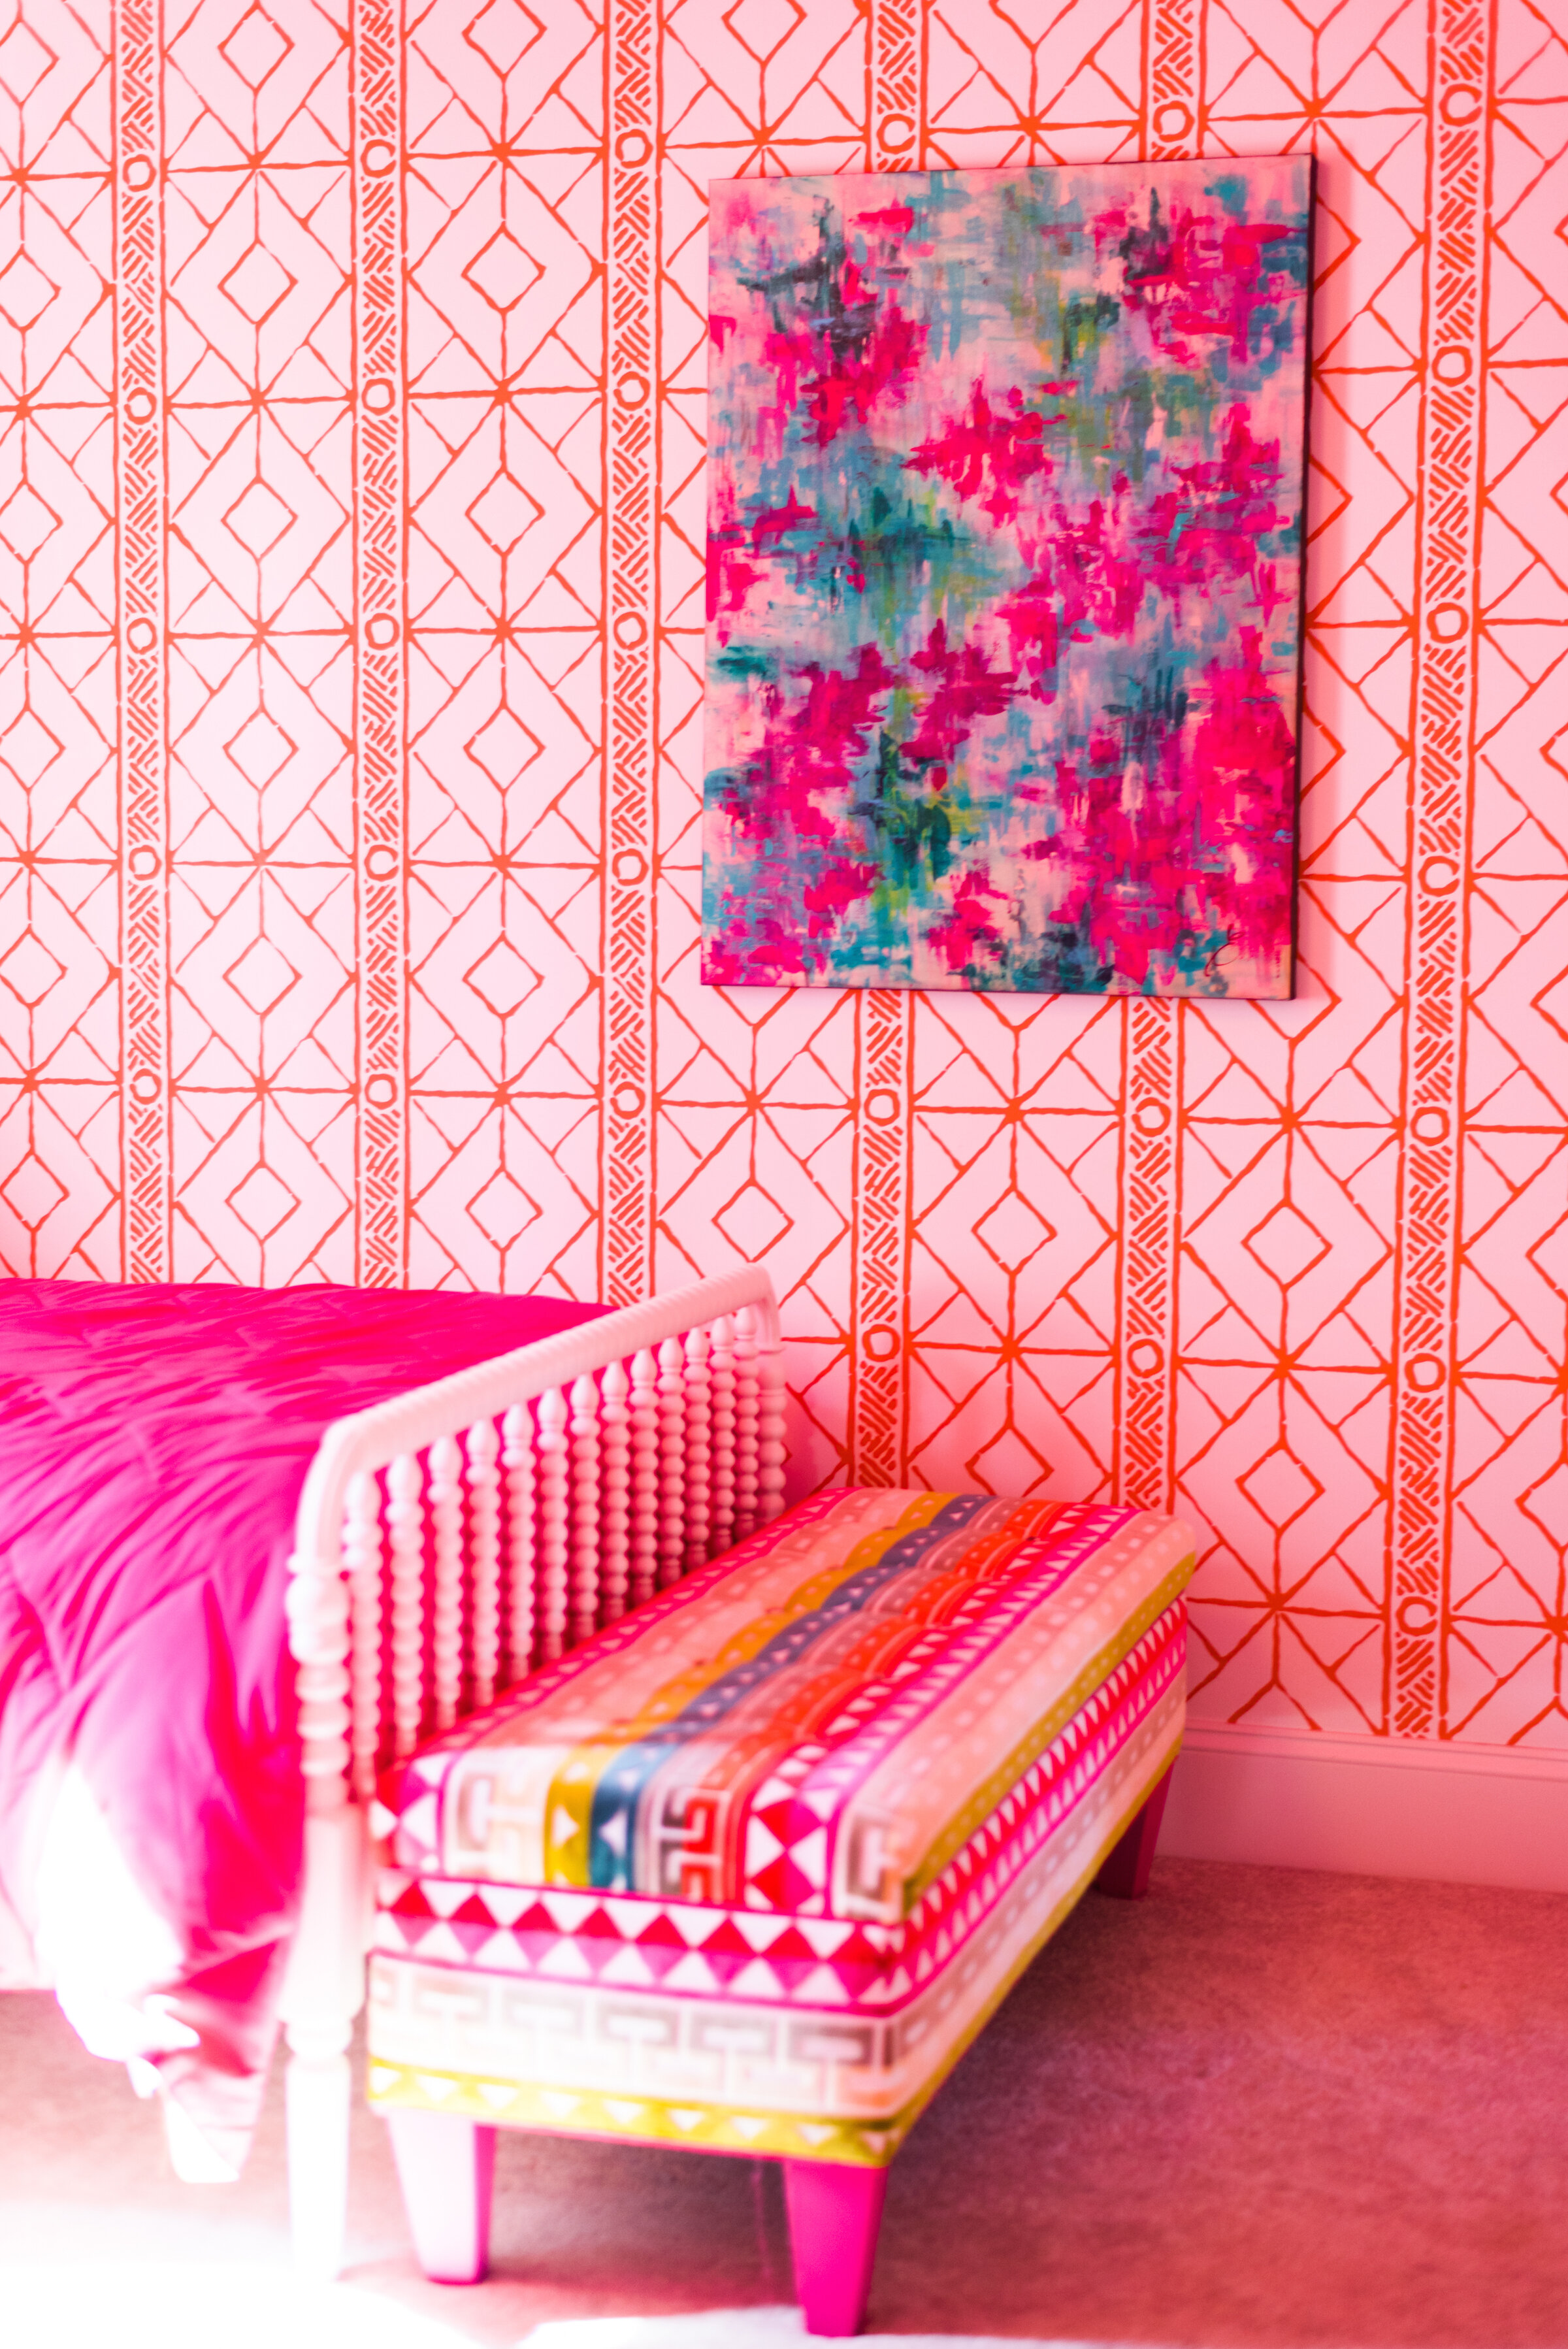 Dwell-Chic-Pink-Paradise-Bedroom-Settee-And-Wallpaper.jpg